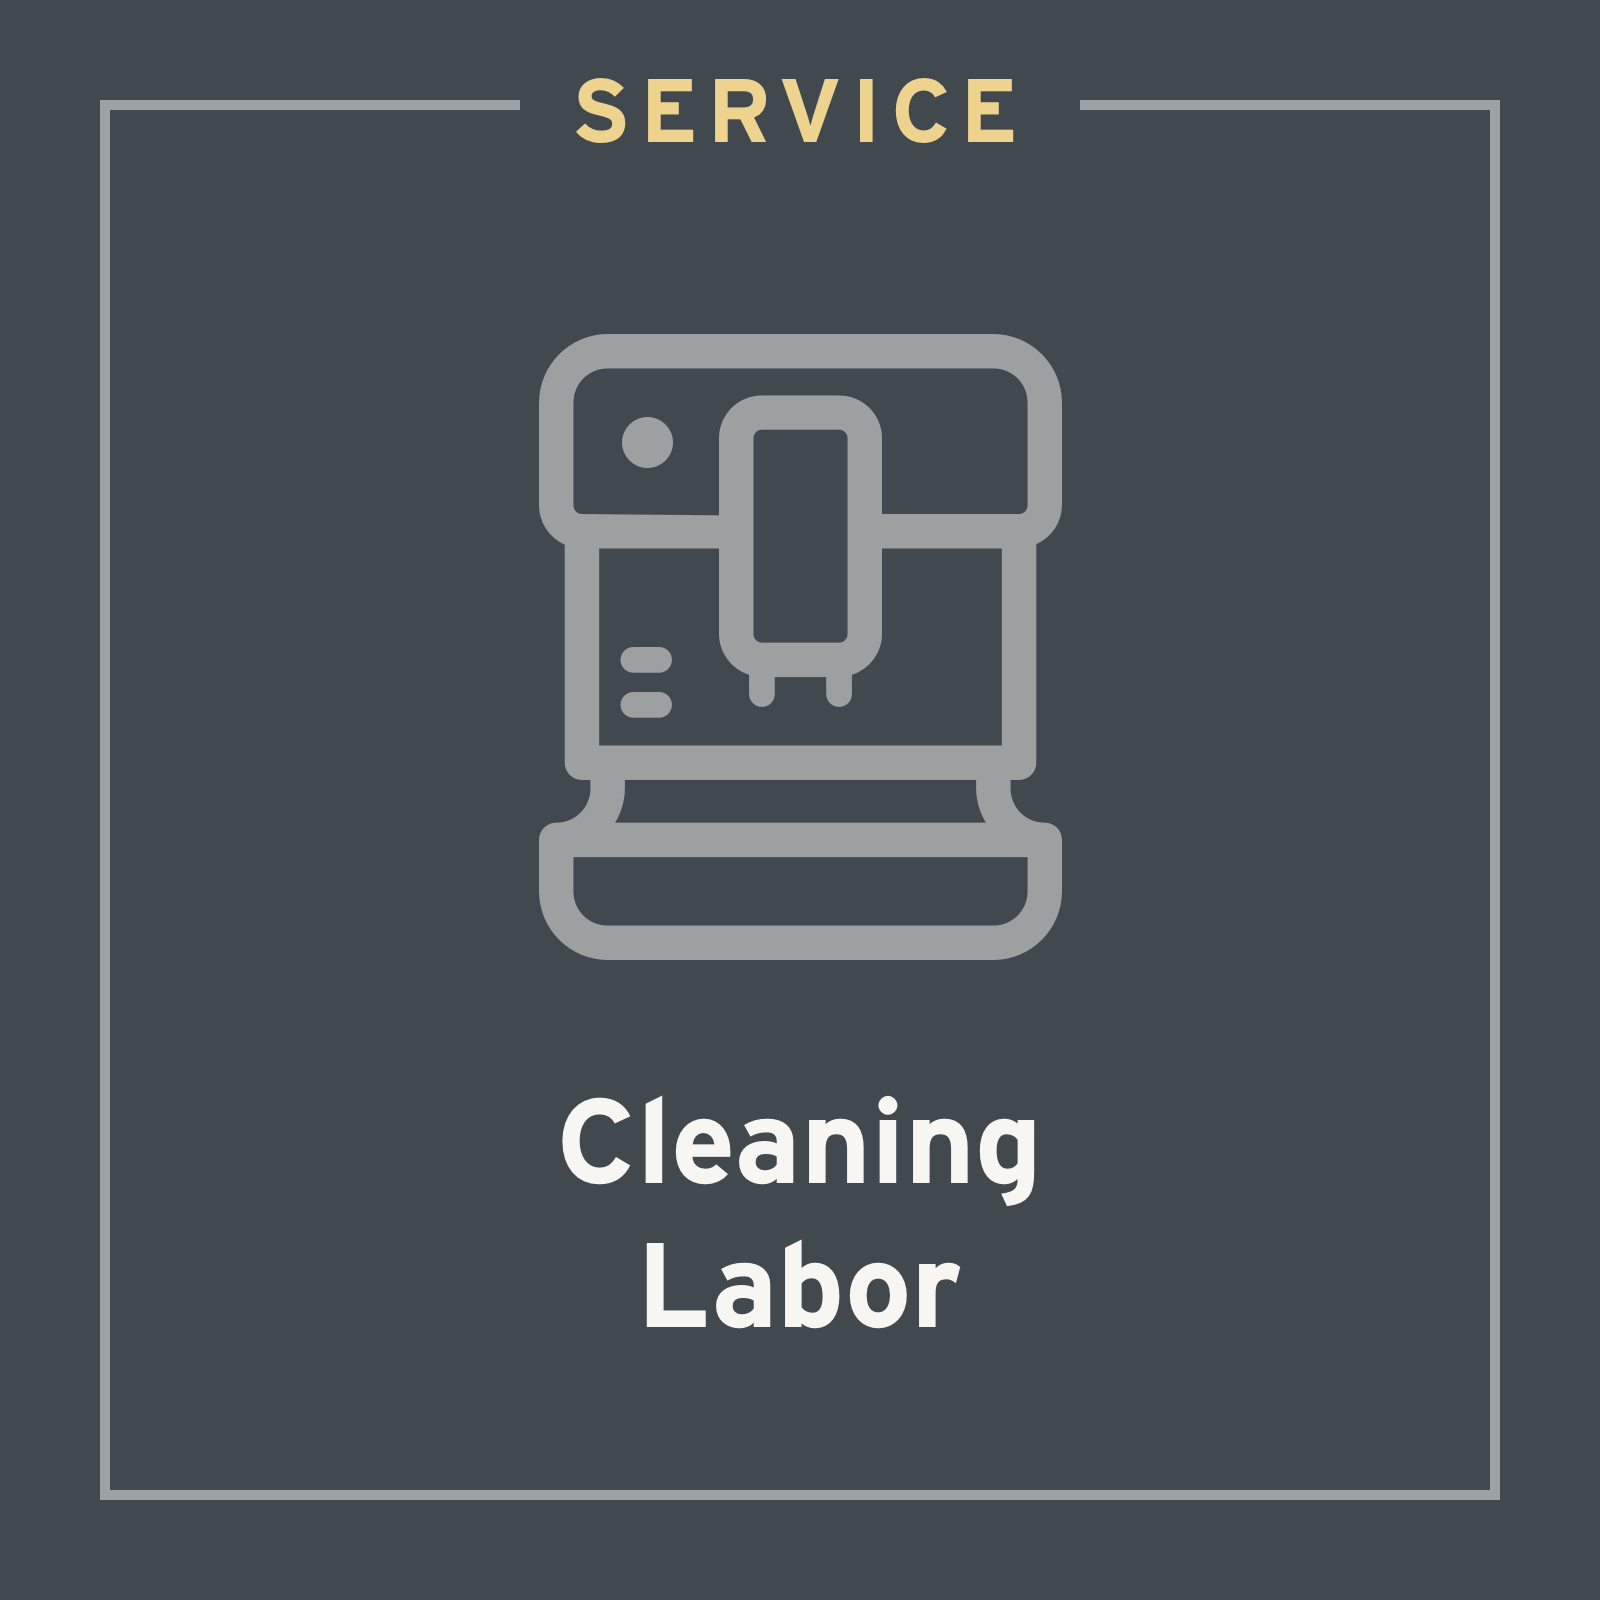 Cleaning Labor (Service)